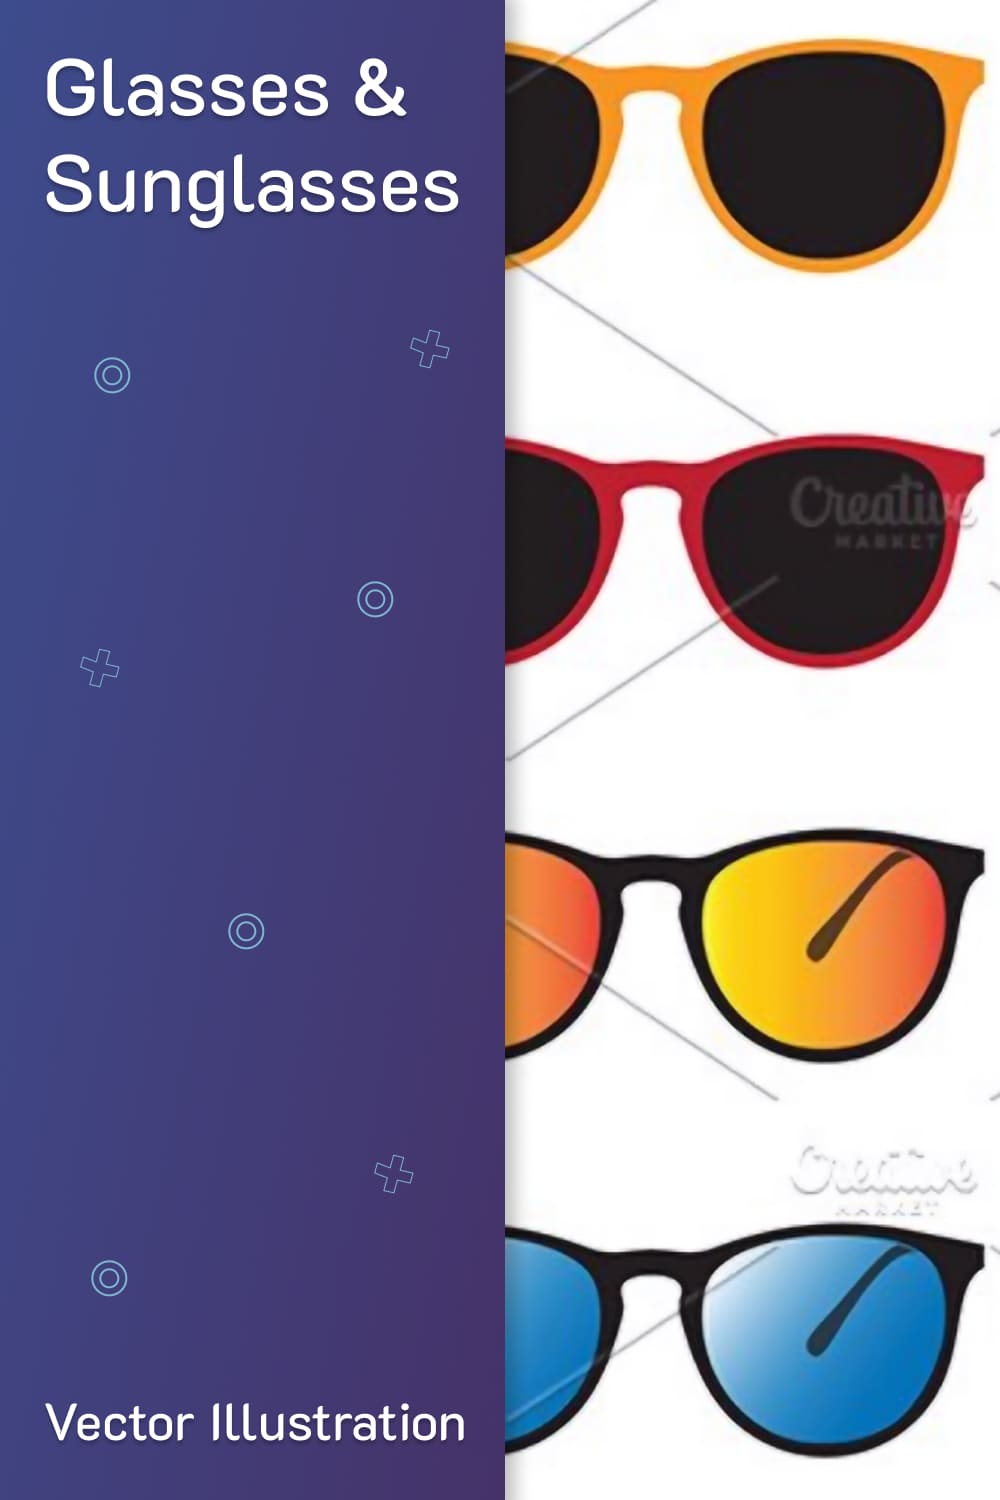 Vector of glasses and sunglasses, picture for pinterest